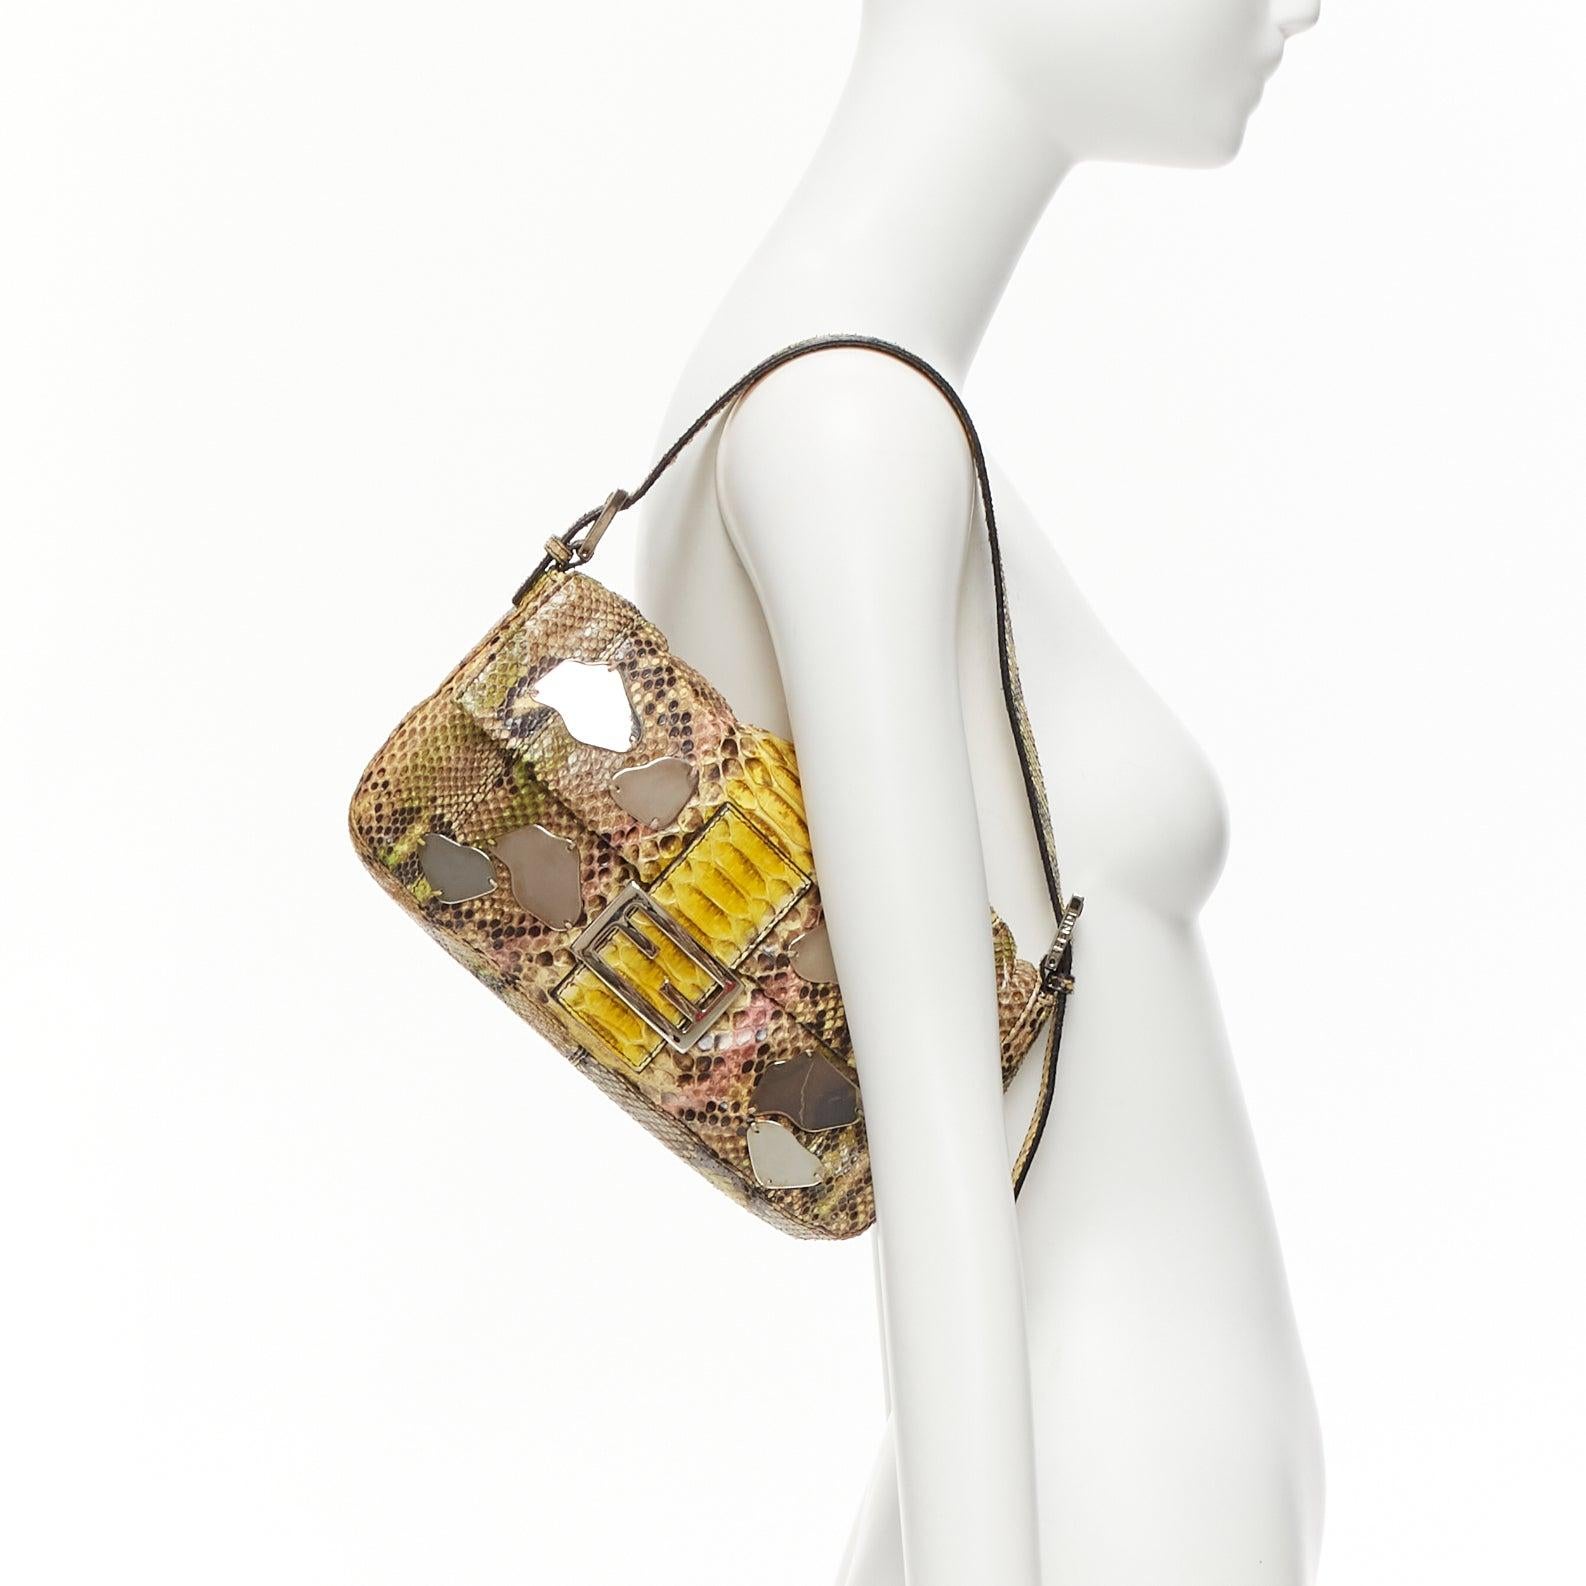 FENDI Baguette yellow ombre scaled leather mirror bead FF logo shoulder bag
Reference: TGAS/D01094
Brand: Fendi
Model: Baguette
Material: Leather, Metal
Color: Yellow, Silver
Pattern: Animal Print
Closure: Magnet
Lining: Green Fabric
Extra Details: